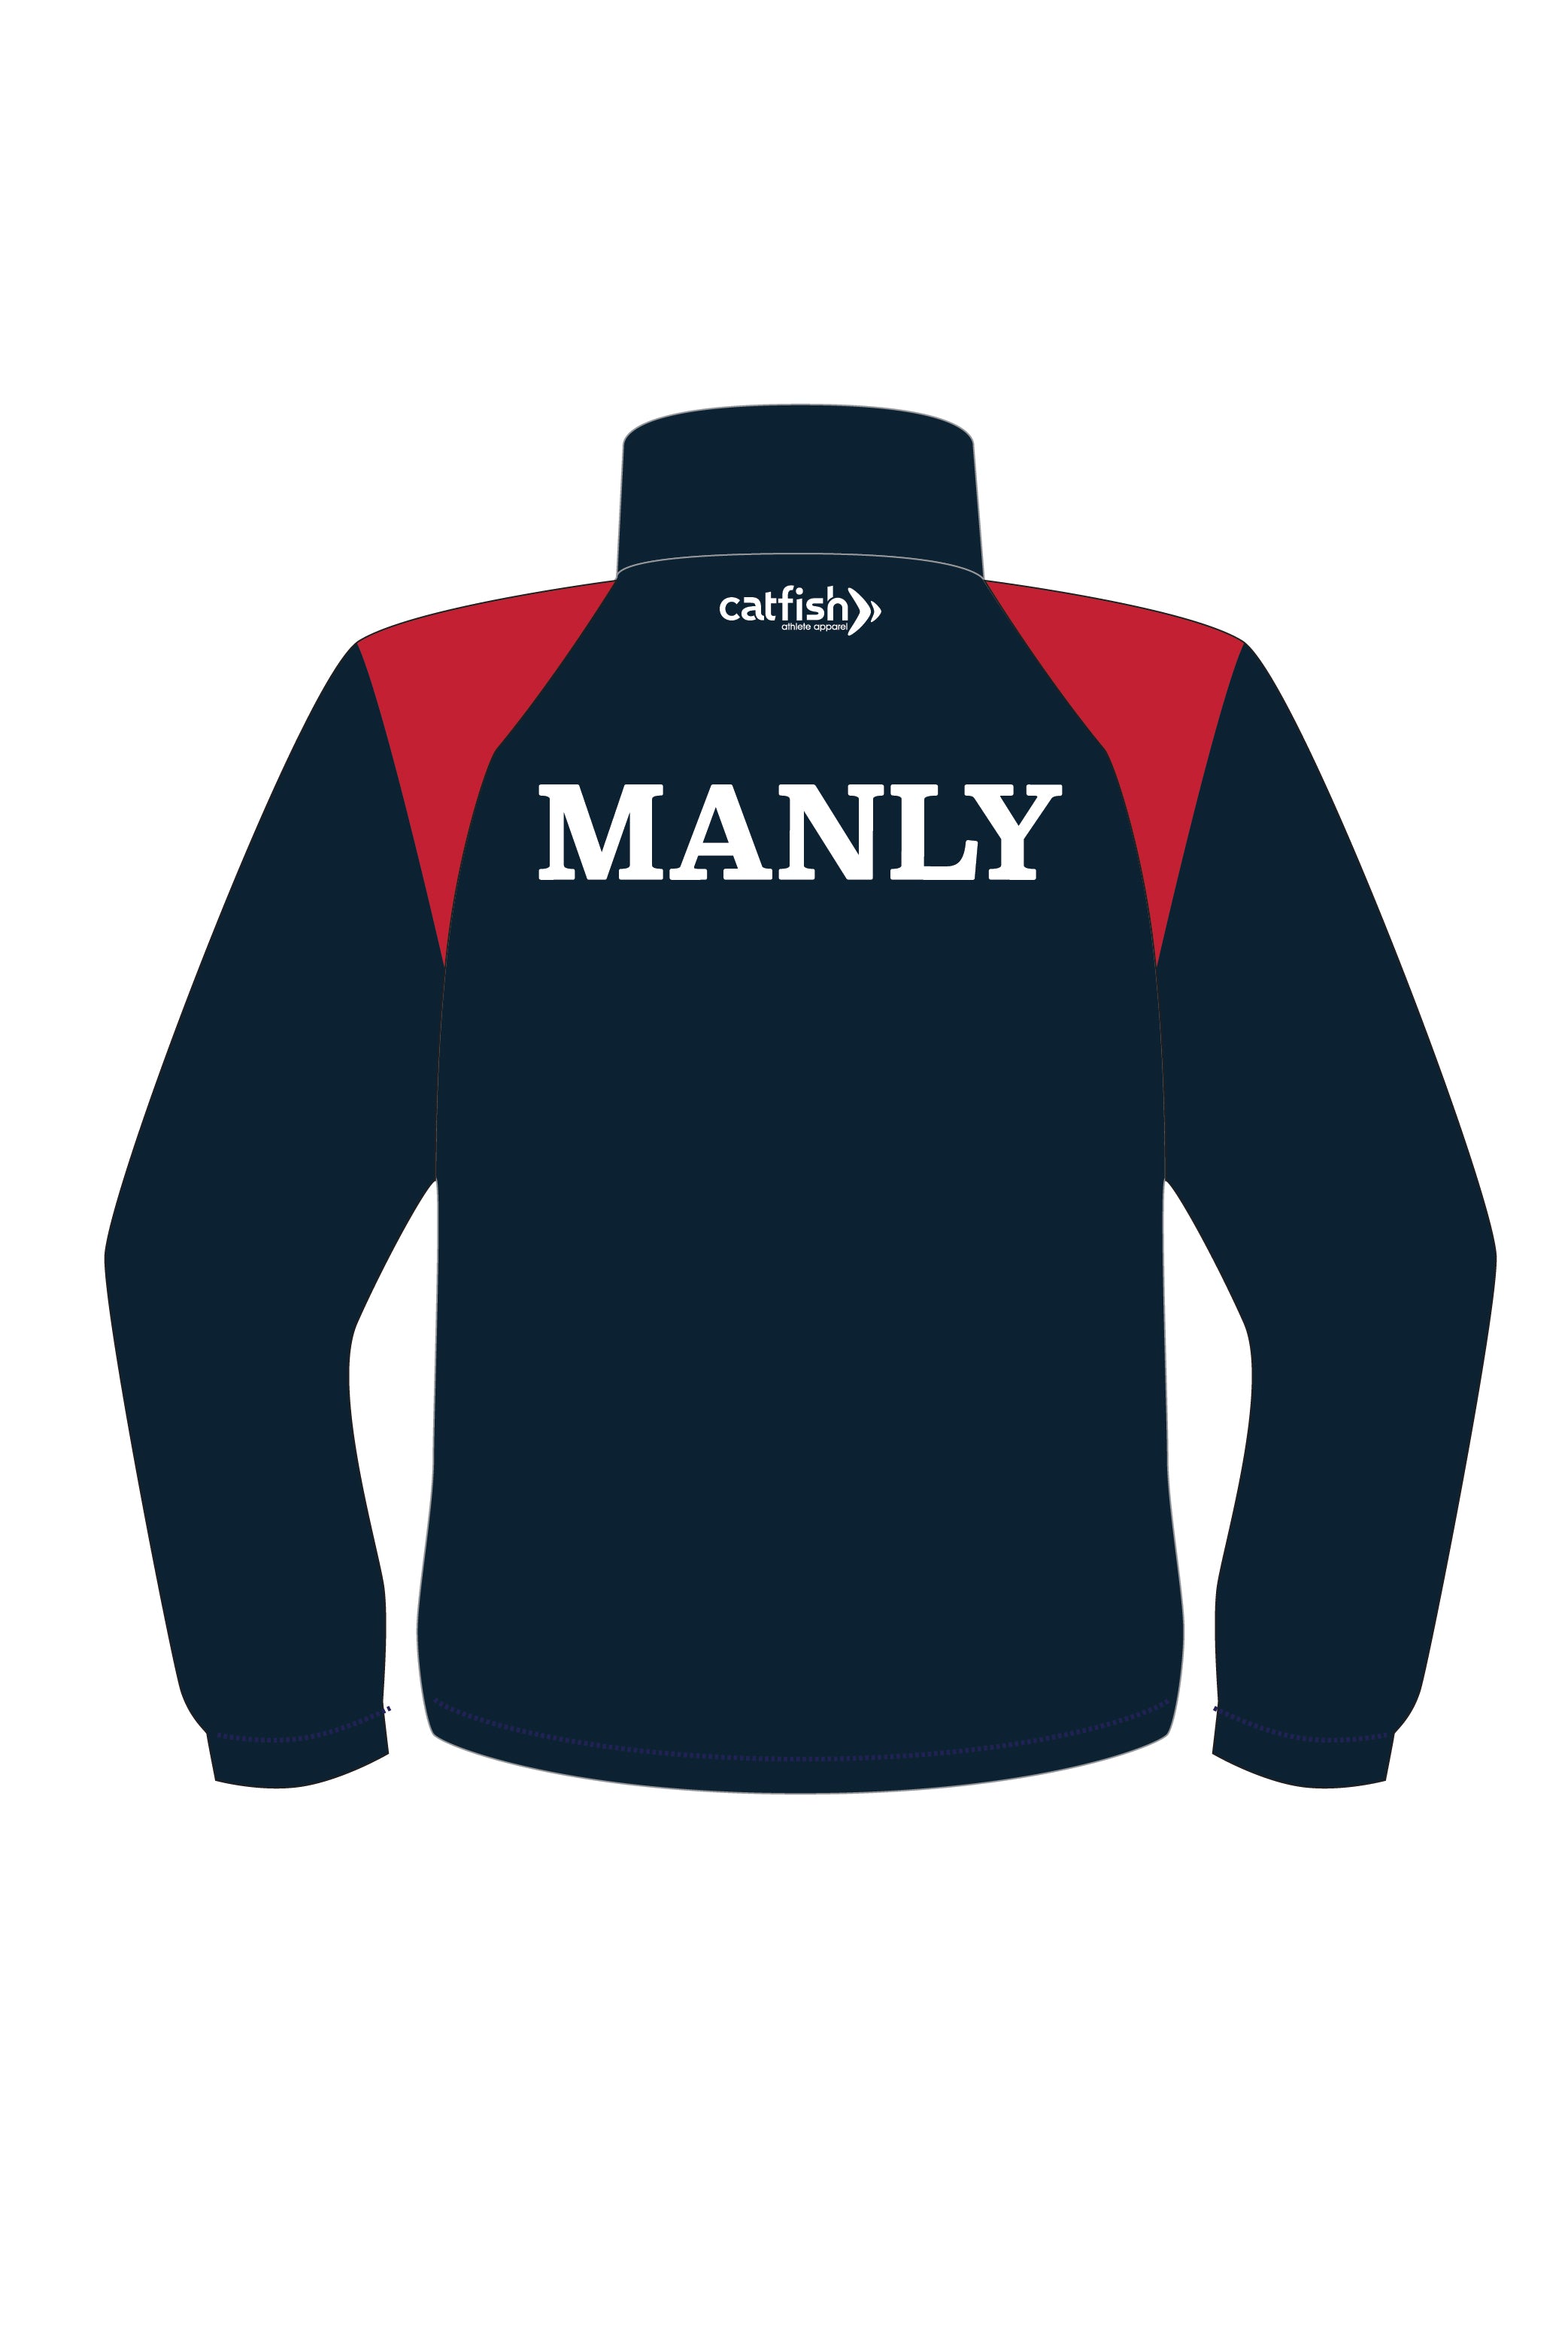 Manly Swimming Club Tracksuit Jacket